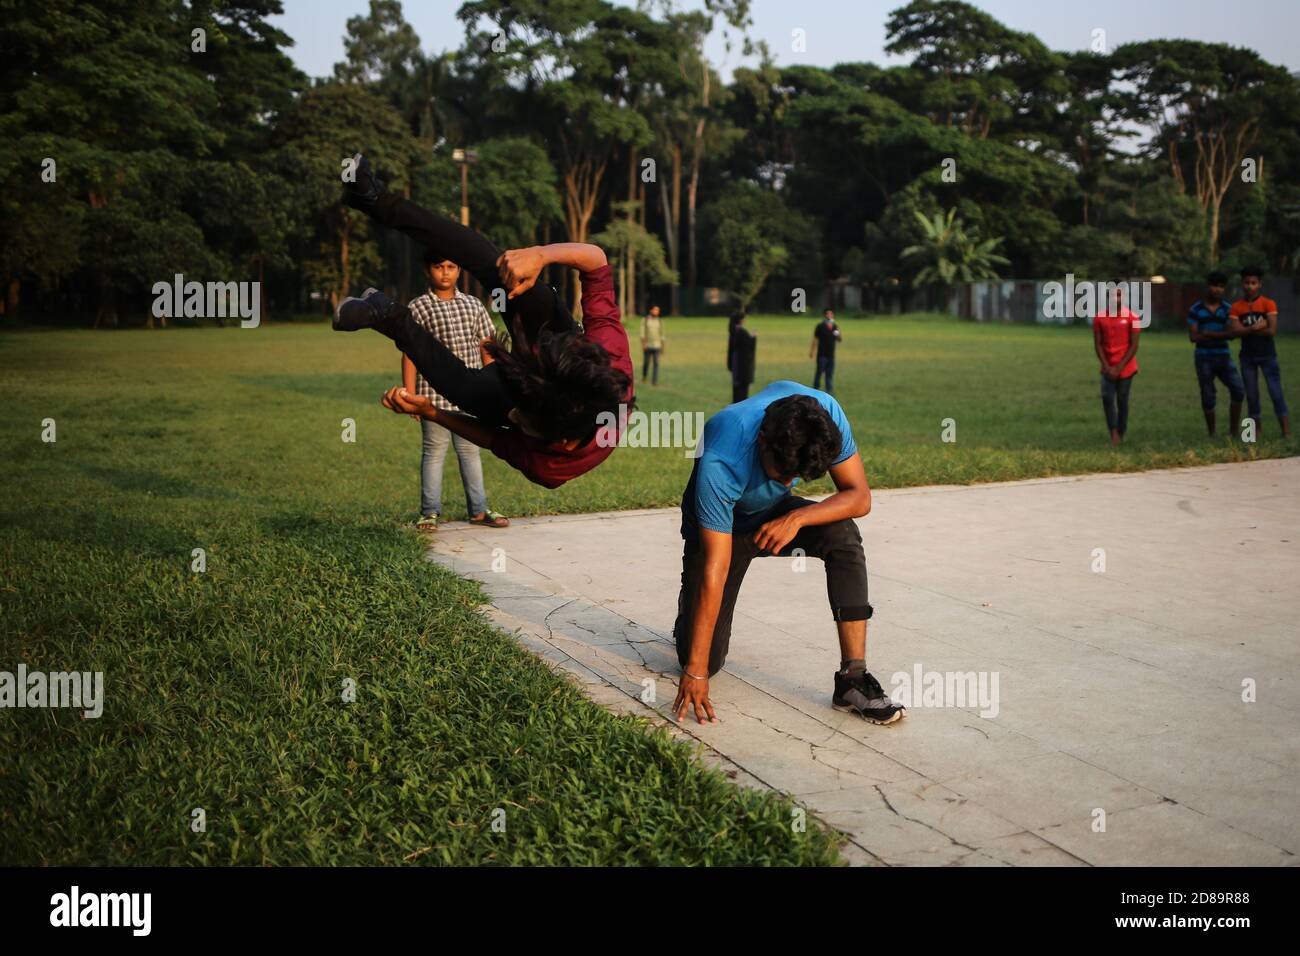 Dhaka, Dhaka, Bangladesh. 28th Oct, 2020. Young boys are performing dance and shooting video through tiktok app, which is a viral video-sharing social networking service. TikTok became the most downloaded app in the US in October 2018, which musical.ly had done once before. In February 2019, TikTok, together with Douyin, hit one billion downloads globally, excluding Android installs in China. In 2019, media outlets cited TikTok as the 7th-most-downloaded mobile app of the decade, from 2010 to 2019. It was also the most-downloaded app on Apple's App Store in 2018 and 2019, surpassing Facebo Stock Photo